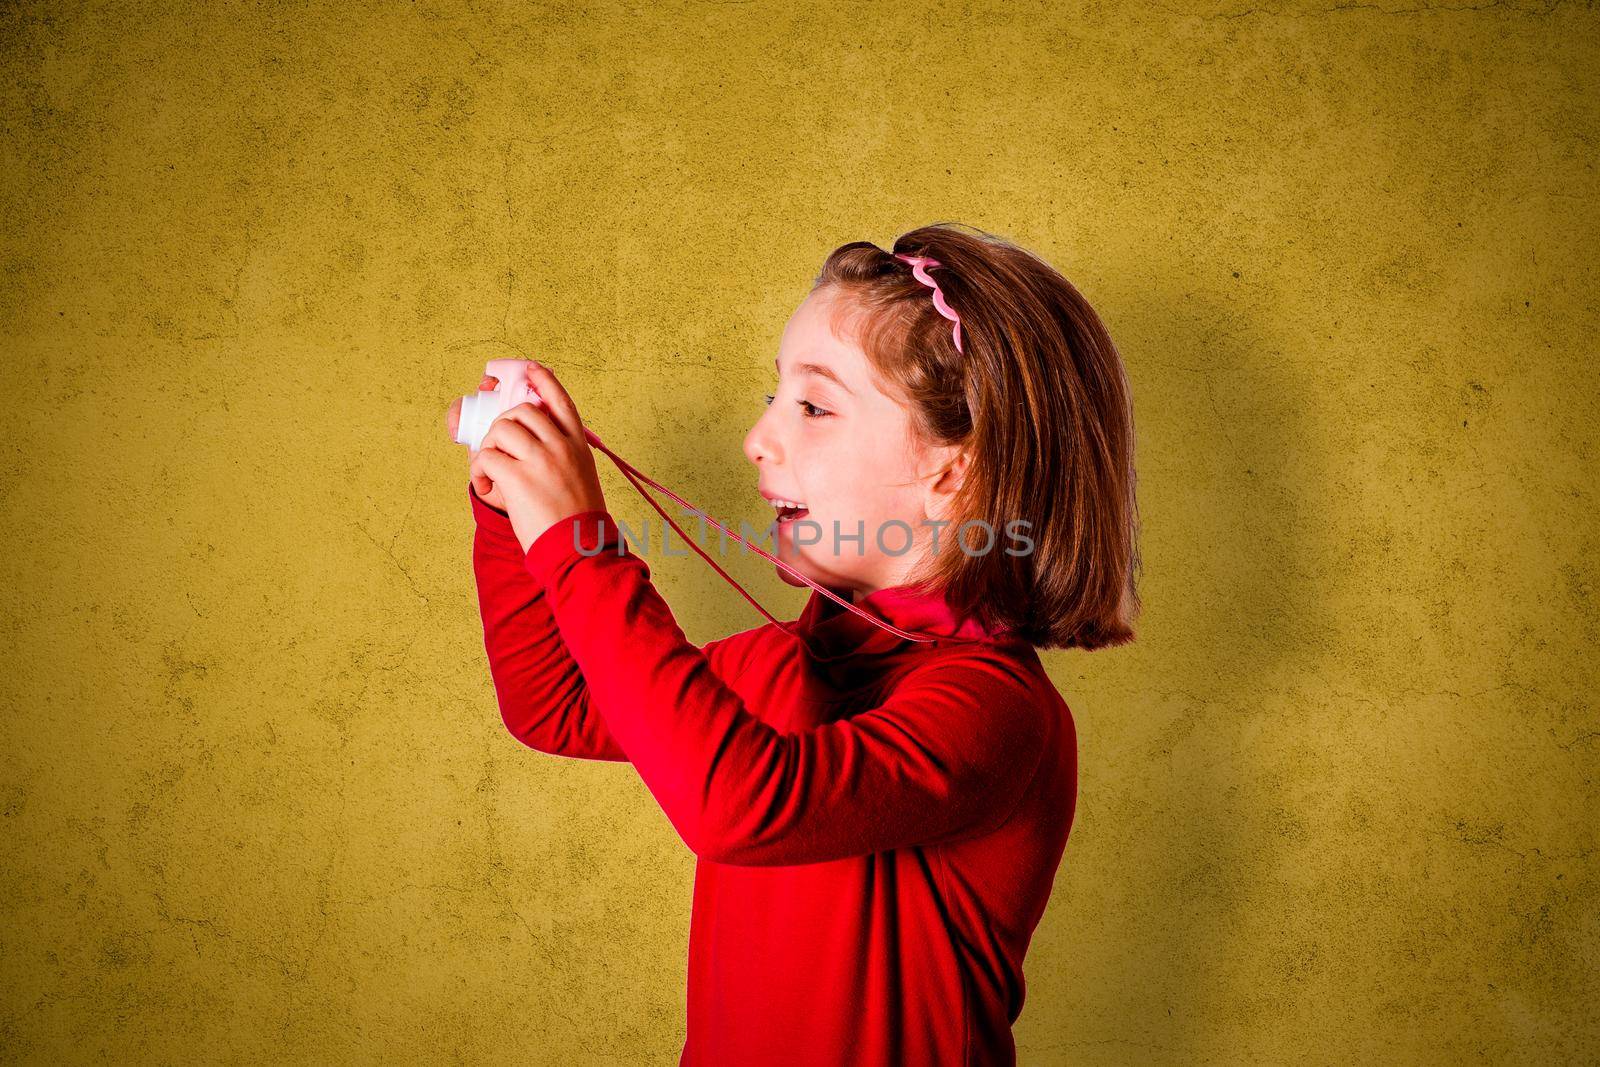 Little Girl Taking Picture Using Toy Photo Camera on yellow background